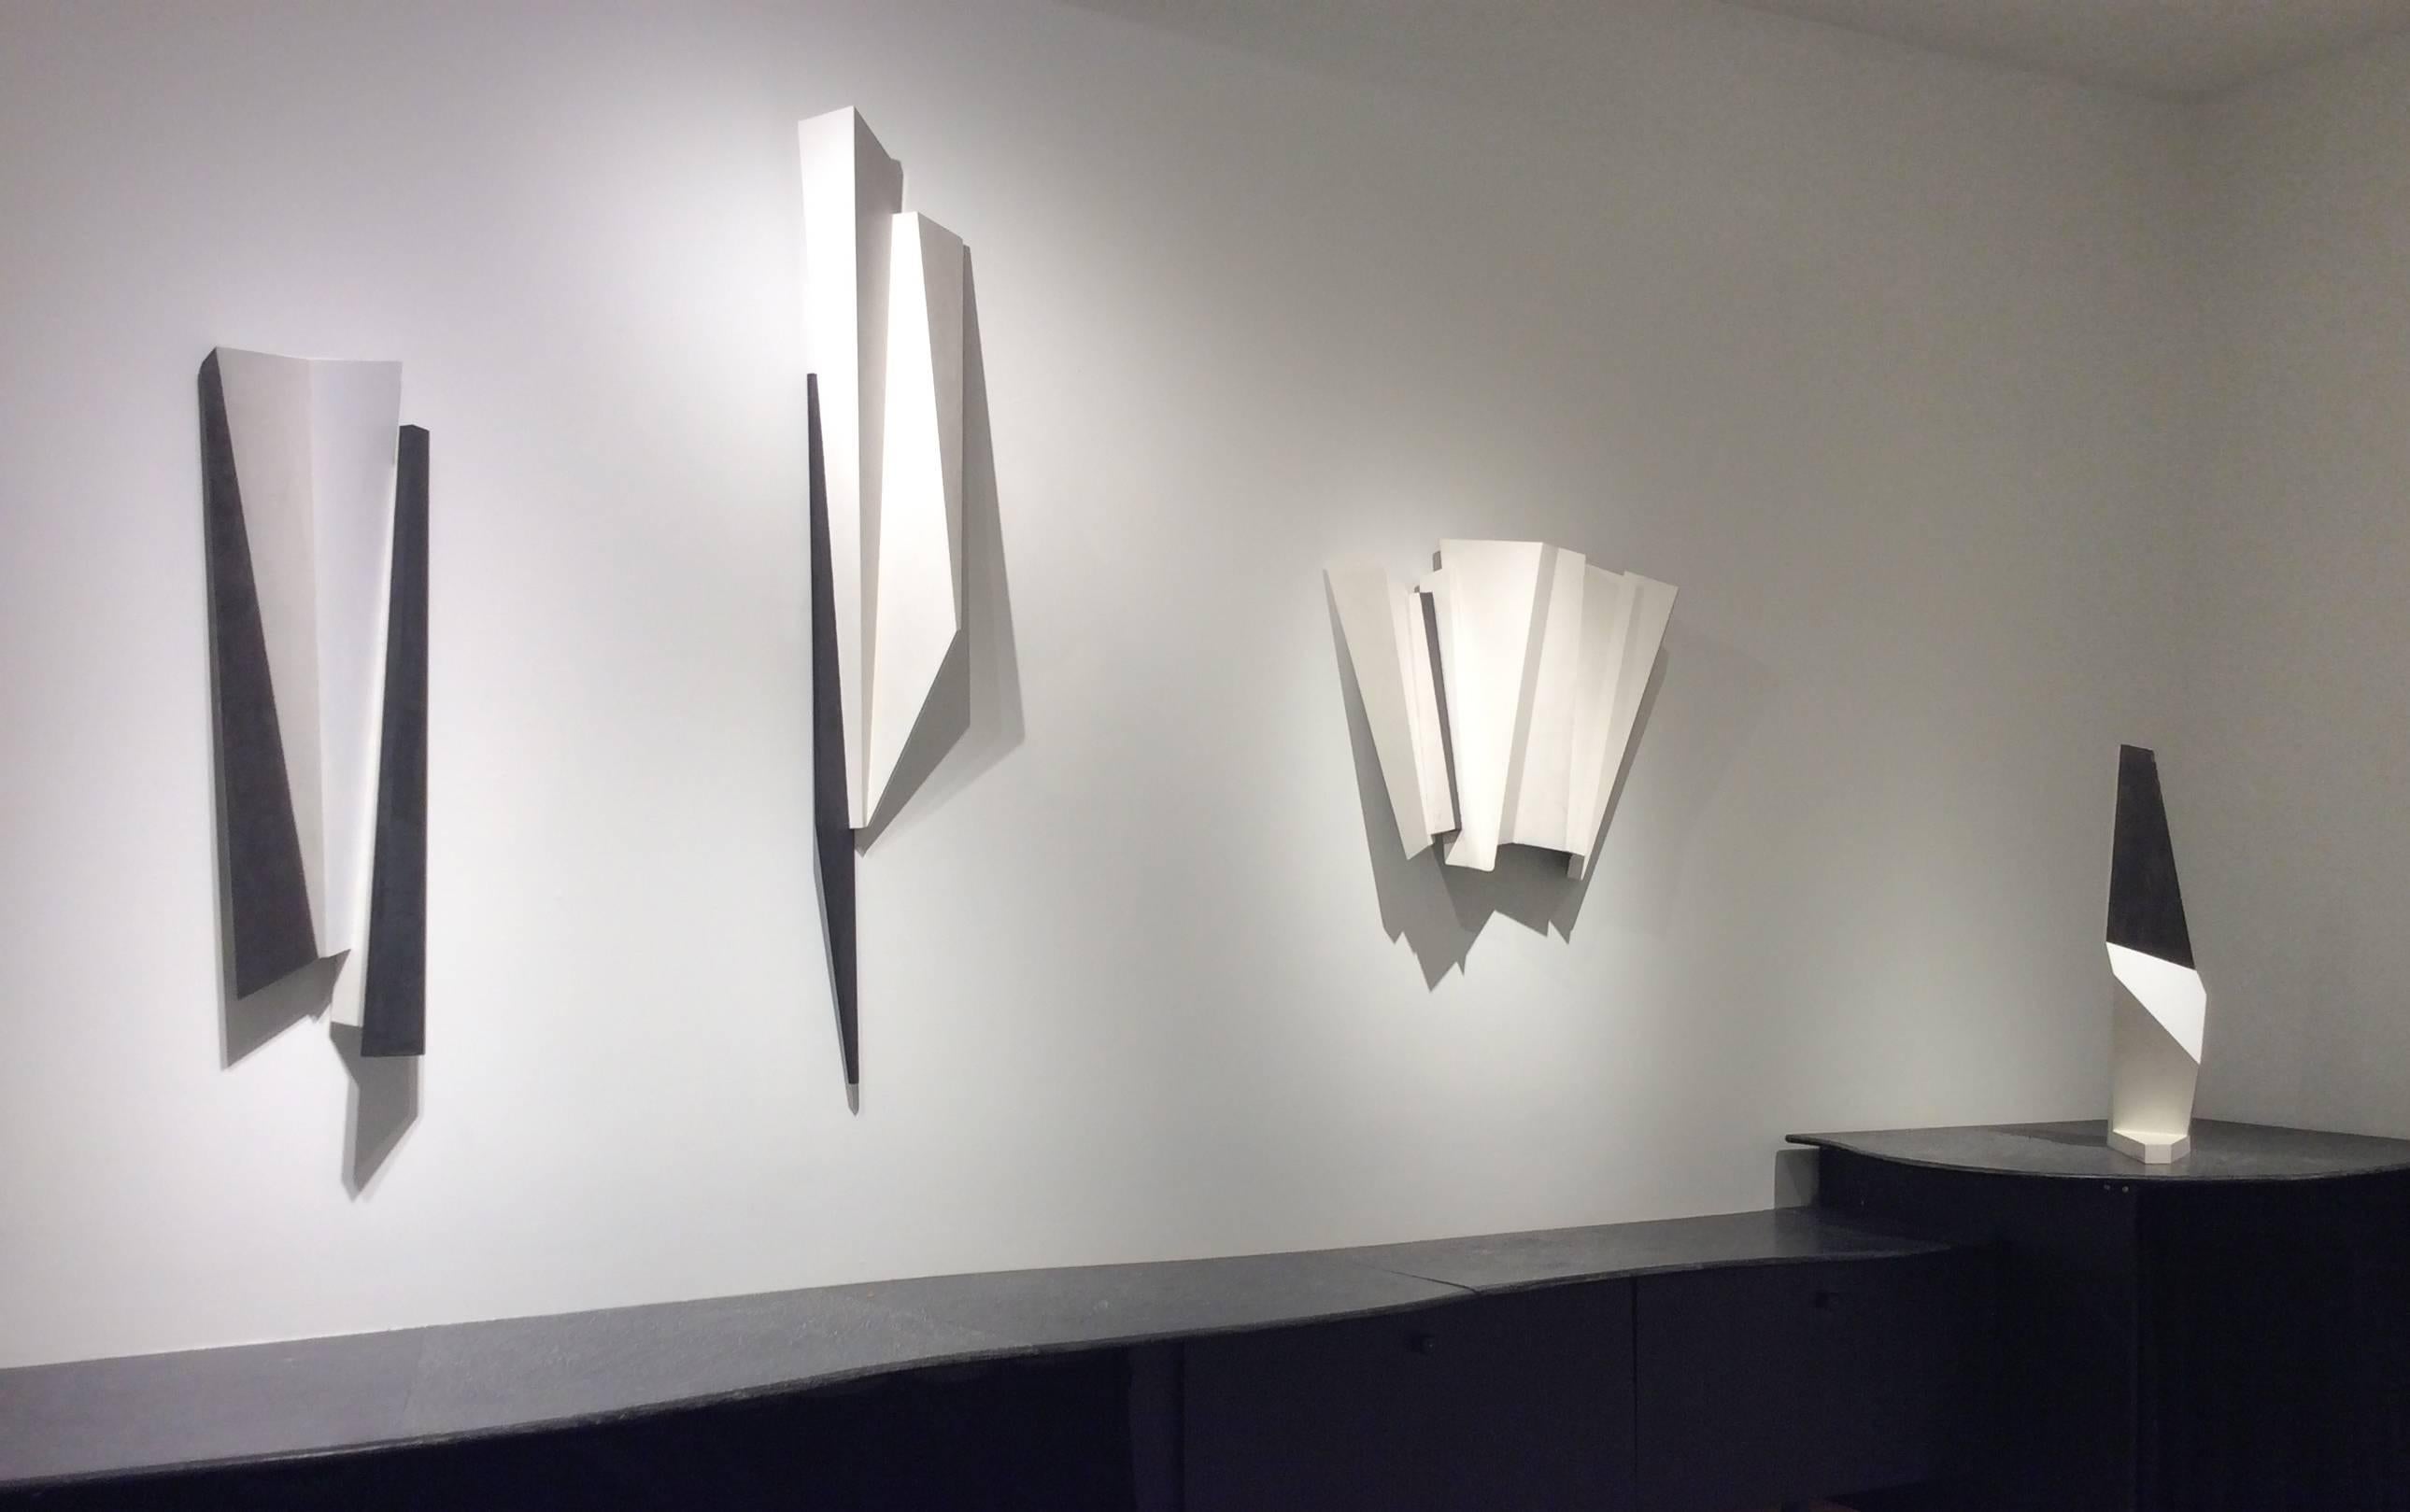 32 x 12 x 6.5
carved precision board & Venetian plaster 

This contemporary, abstract minimalist wall sculpture was made by Japanese artist, Dai Ban in 2017. The elegant minimalist wall sculpture is incredibly lightweight and has a thin surface